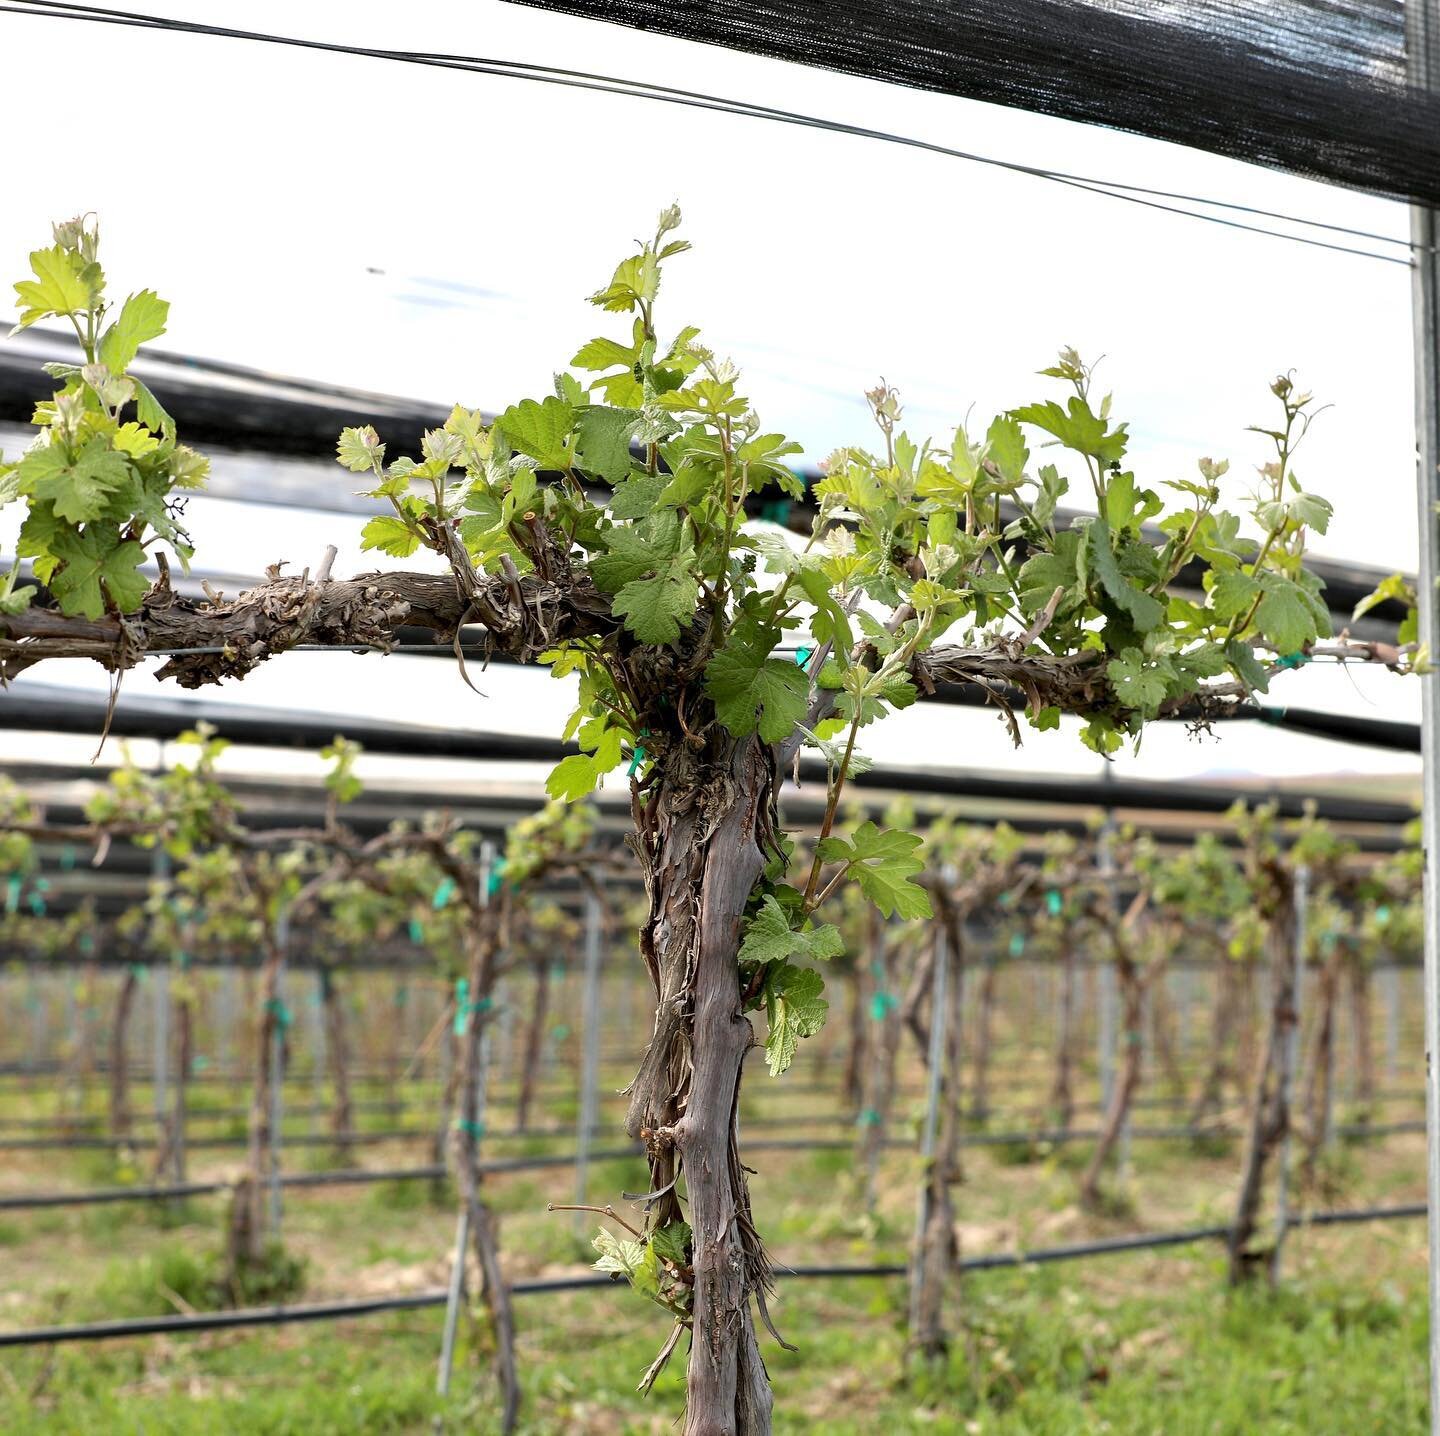 vines are looking pretty darn good right now